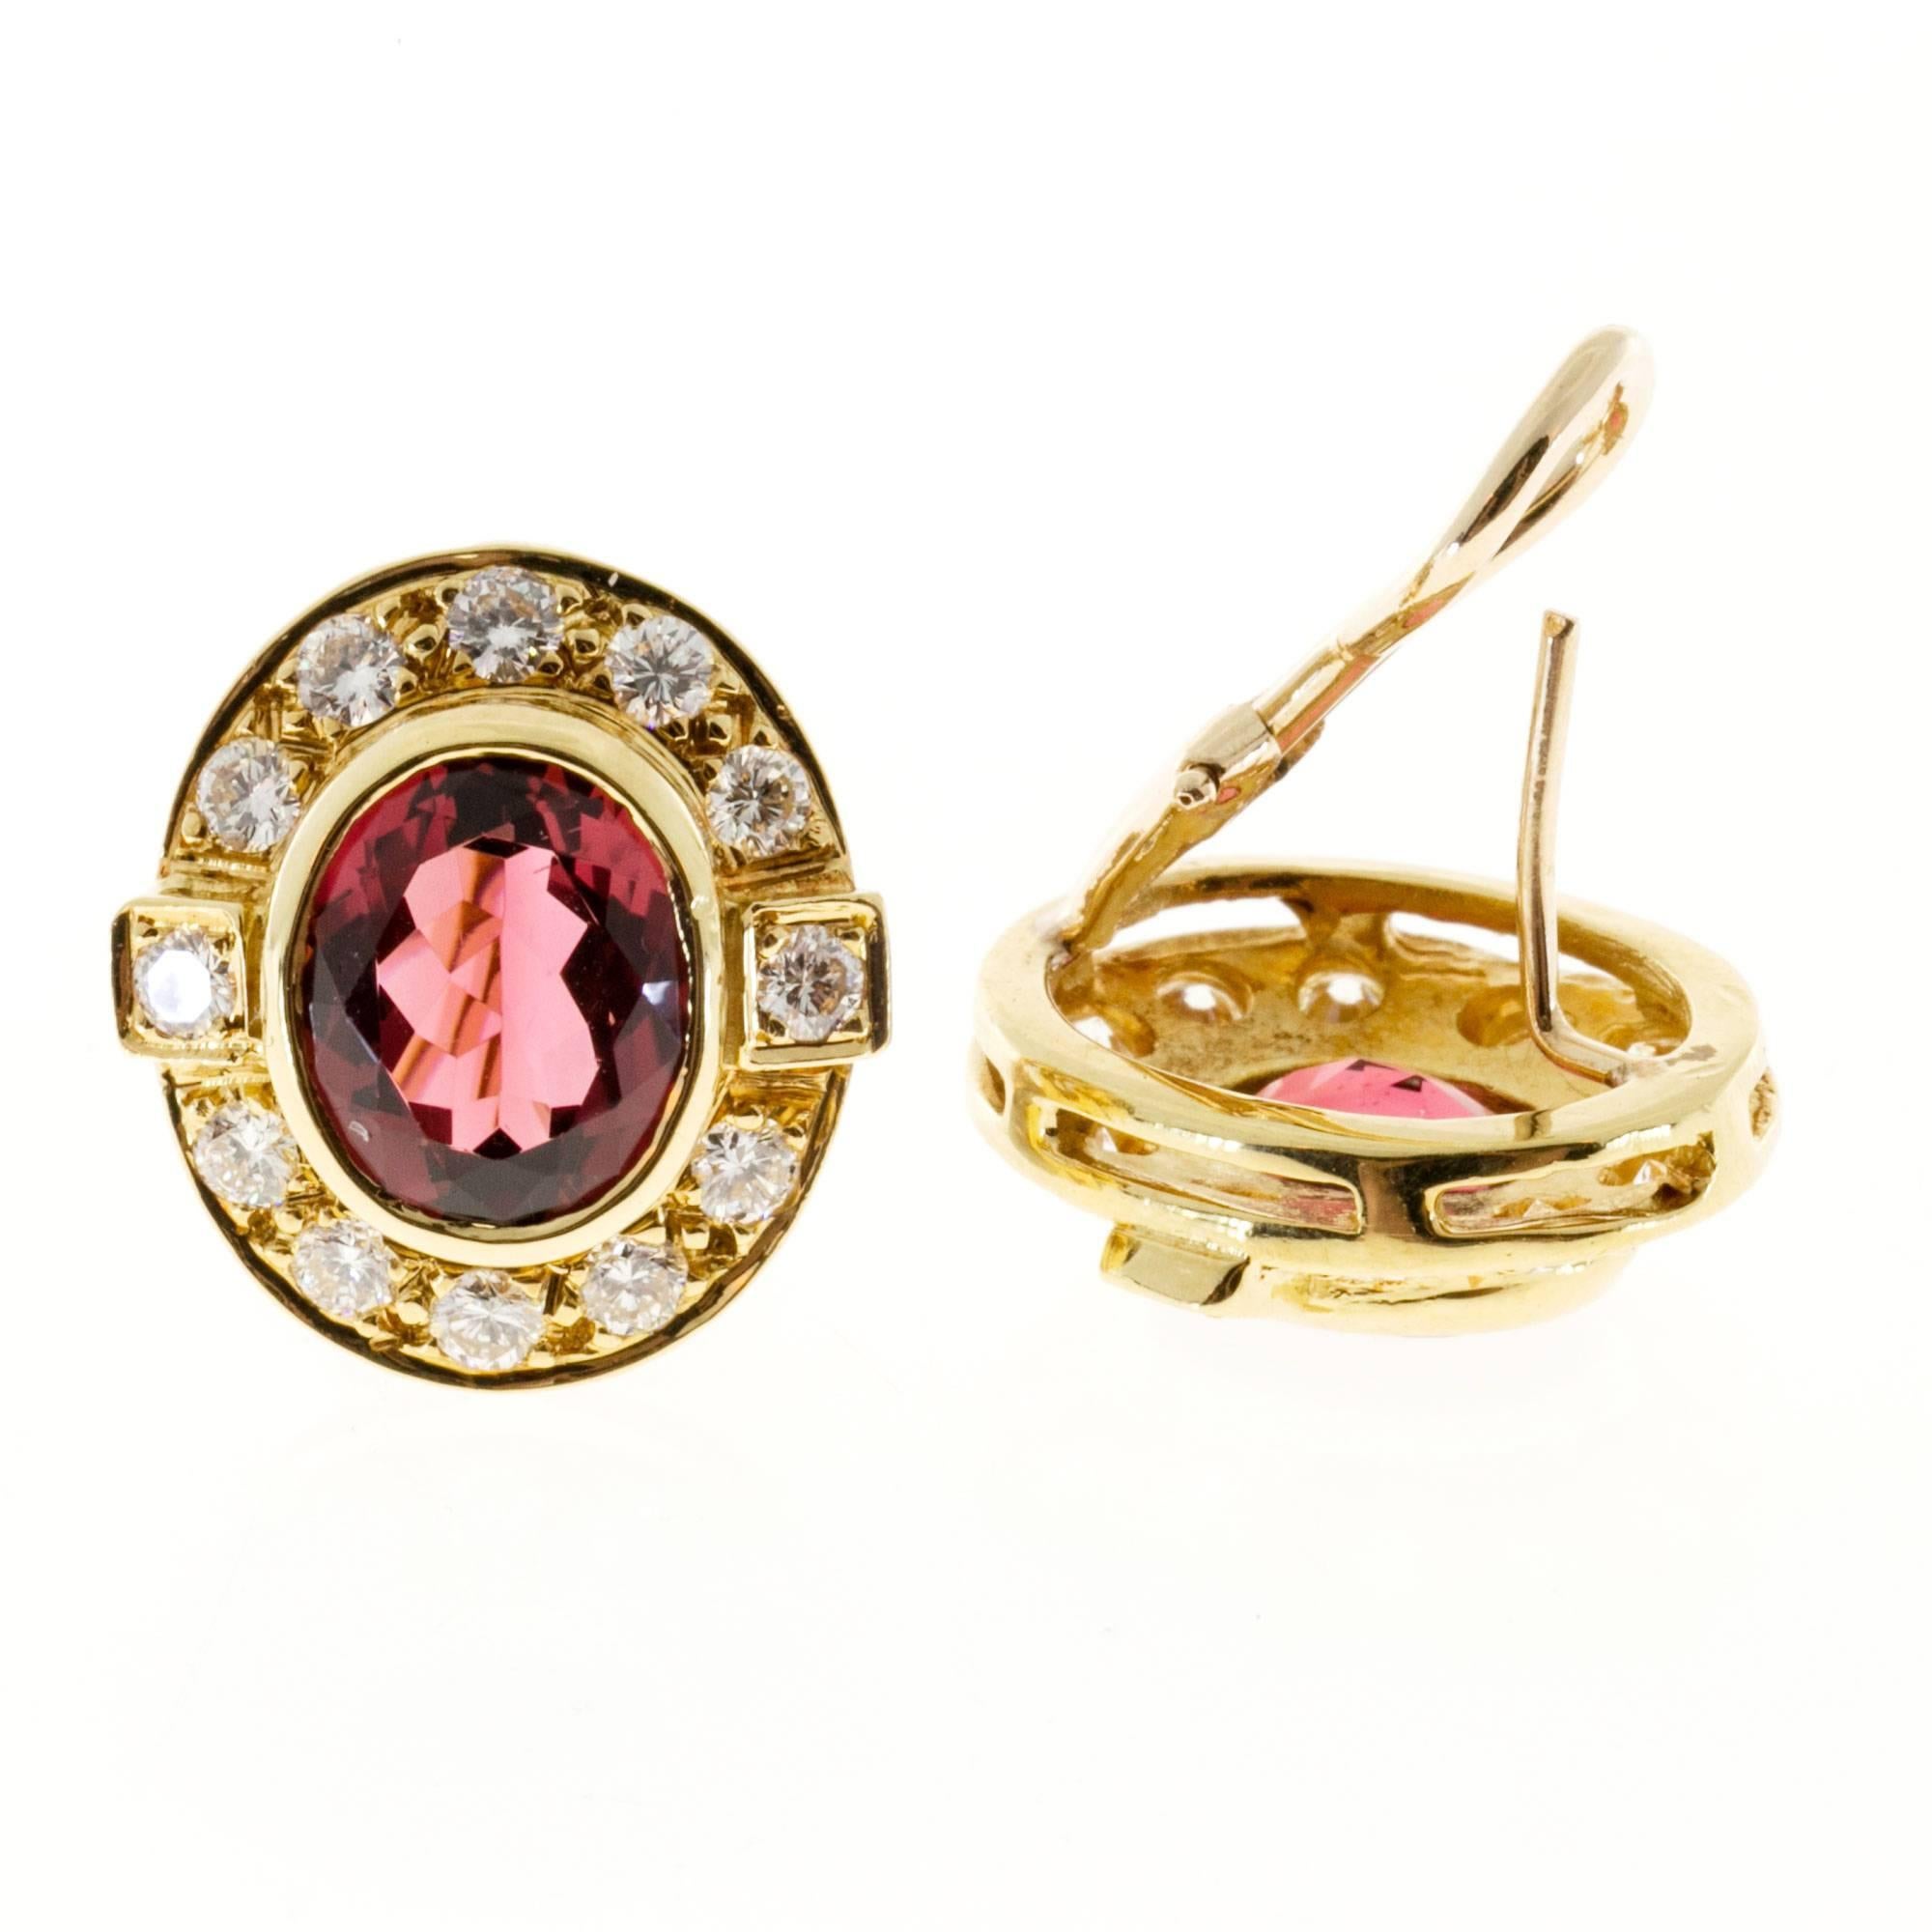 Bright oval pink Tourmalines set in a beautiful 14k yellow gold clip post earrings with excellent full cut diamonds.

2 oval genuine natural pink Tourmaline, approx. total weight 6.00ct, 10 x 8.5mm
24 full cut diamonds approx. total weight